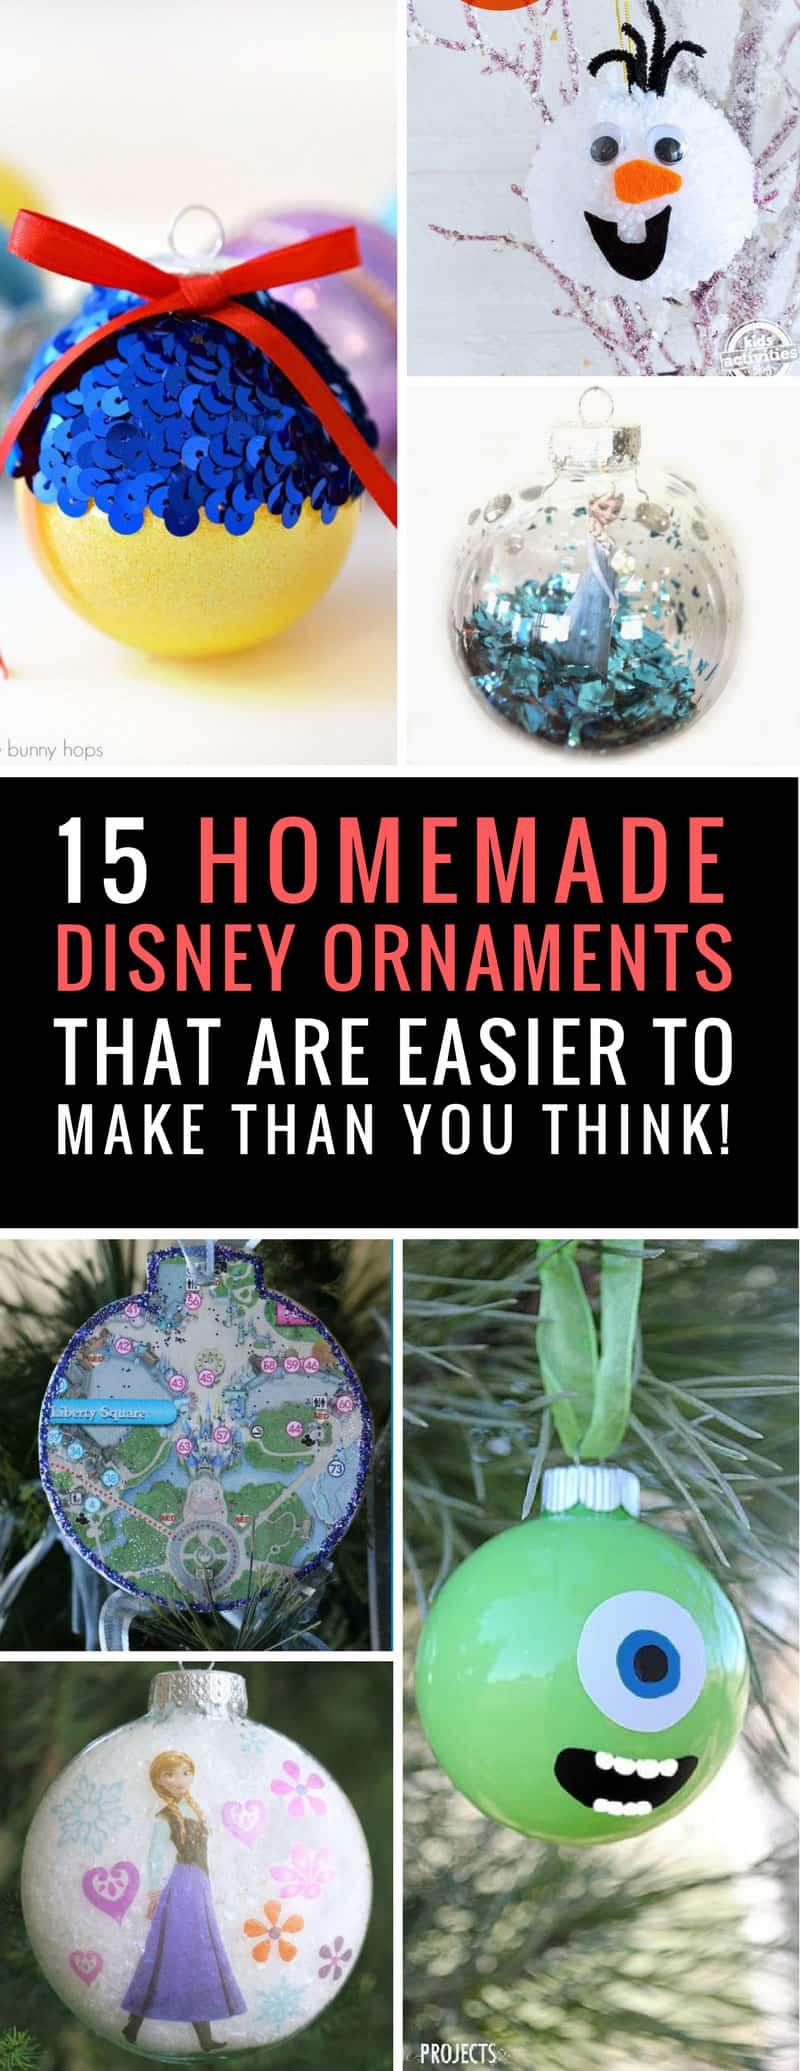 Homemade Disney Ornaments - My kids are going to go crazy when they see these ideas - they've always wanted to fill the tree with Disney princesses and Mickey Mouse! | DIY Disney Ornaments | Make Your Own Disney Christmas Ornaments